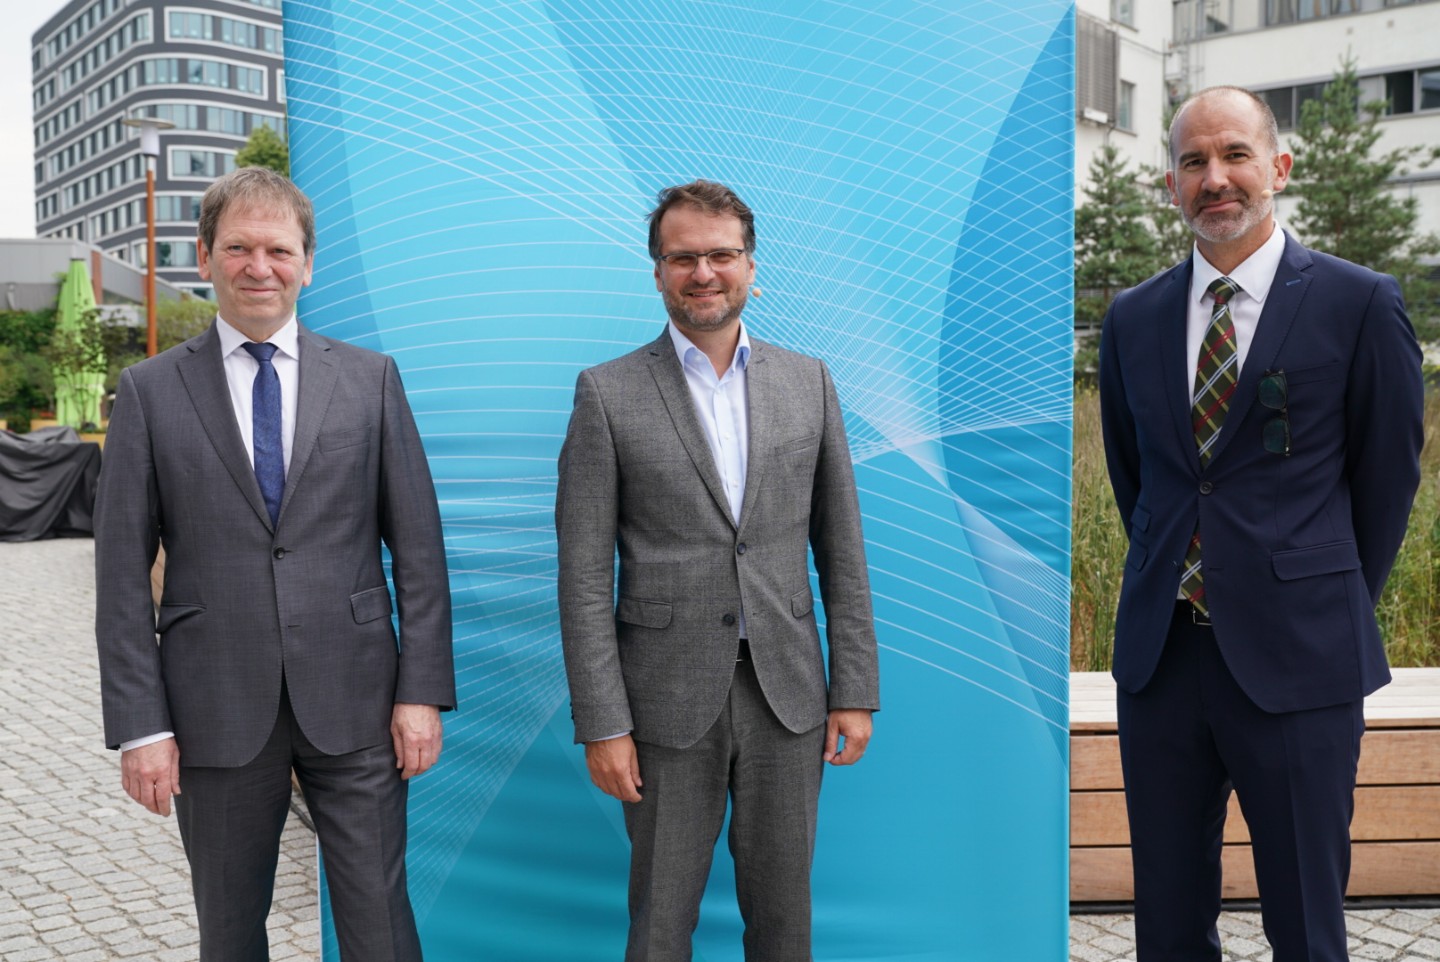 Prof. Hans-Martin Henning, Director Fraunhofer ISE, Andreas Feicht, State Secretary for Energy at the Federal Ministry of Economics and Prof. Raoul Klingner, Director of Research, Fraunhofer-Gesellschaft (l.t.r.) on the occasion of the opening of Fraunhofer ENIQ in Berlin .